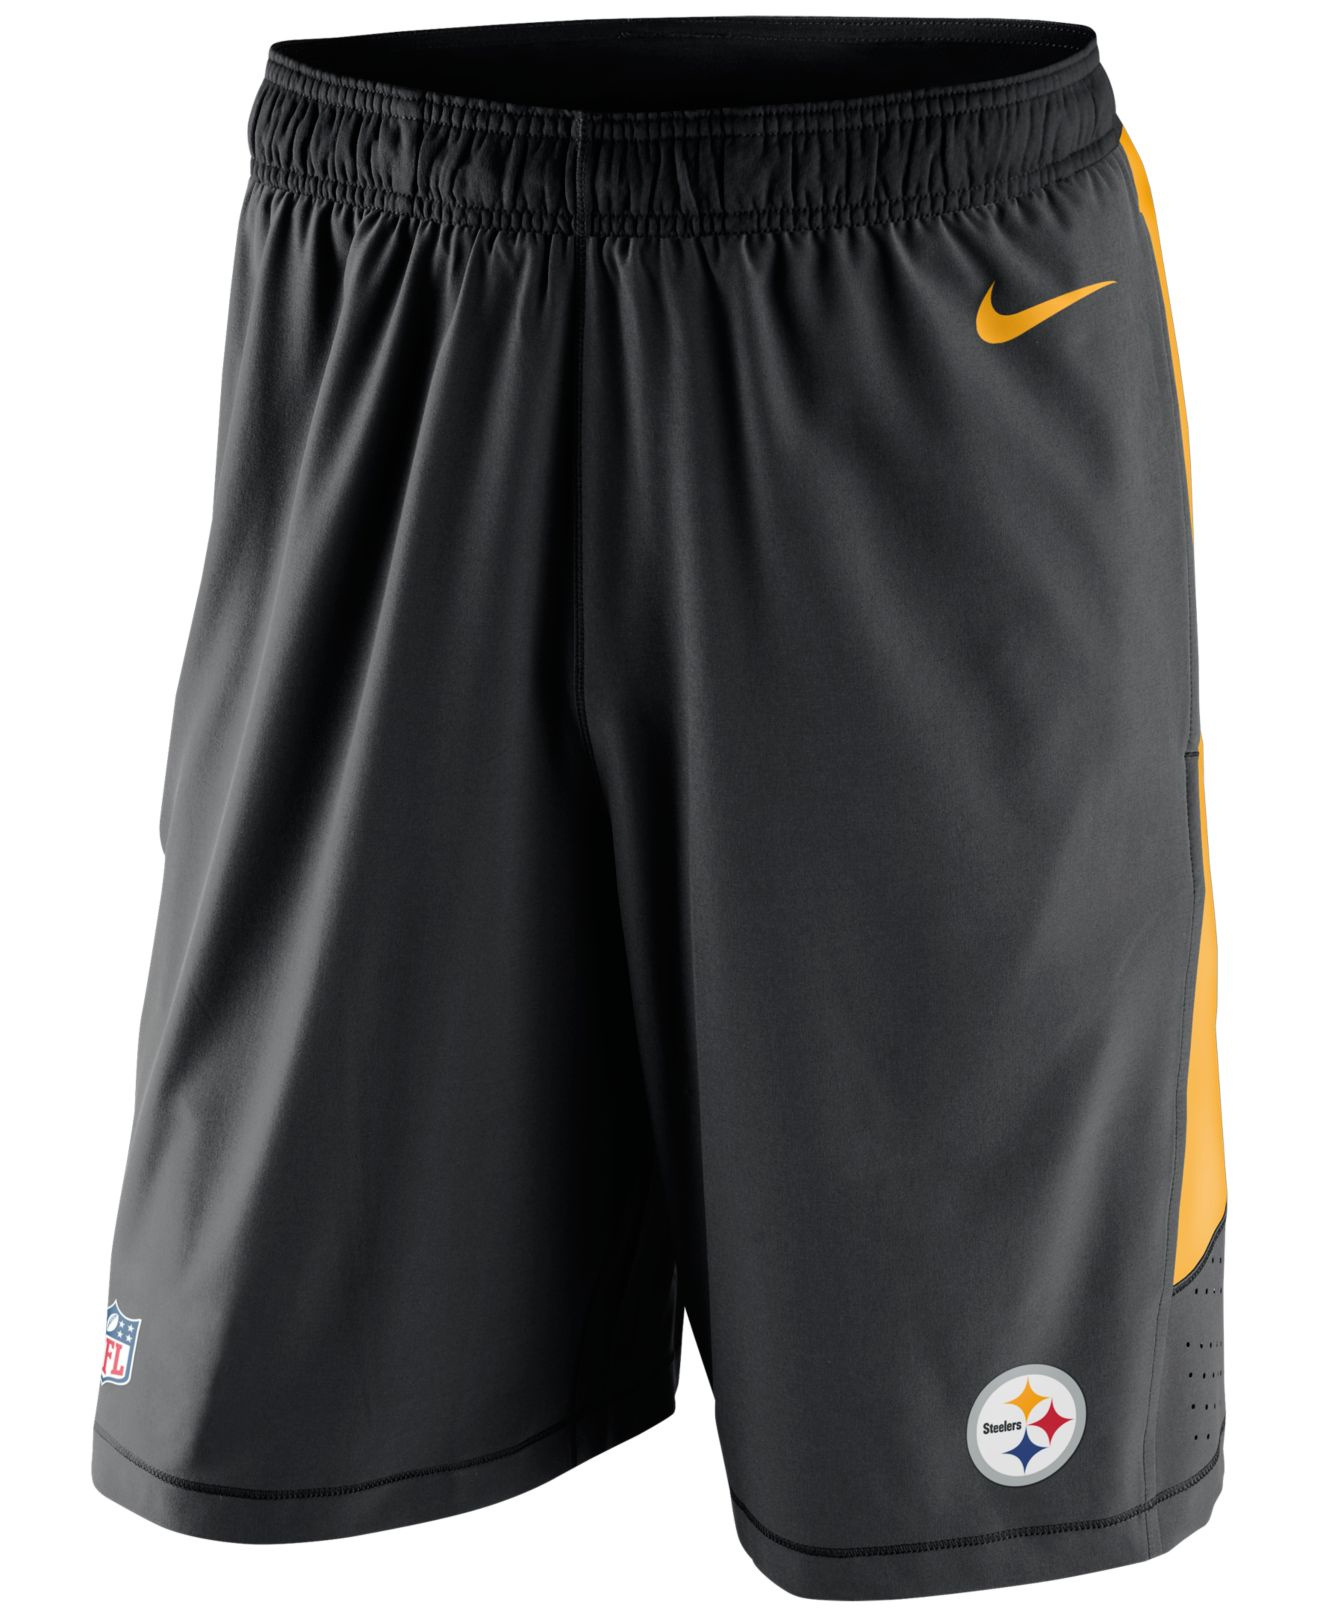 Lyst - Nike Men'S Pittsburgh Steelers Speed Vent Shorts in Black for Men